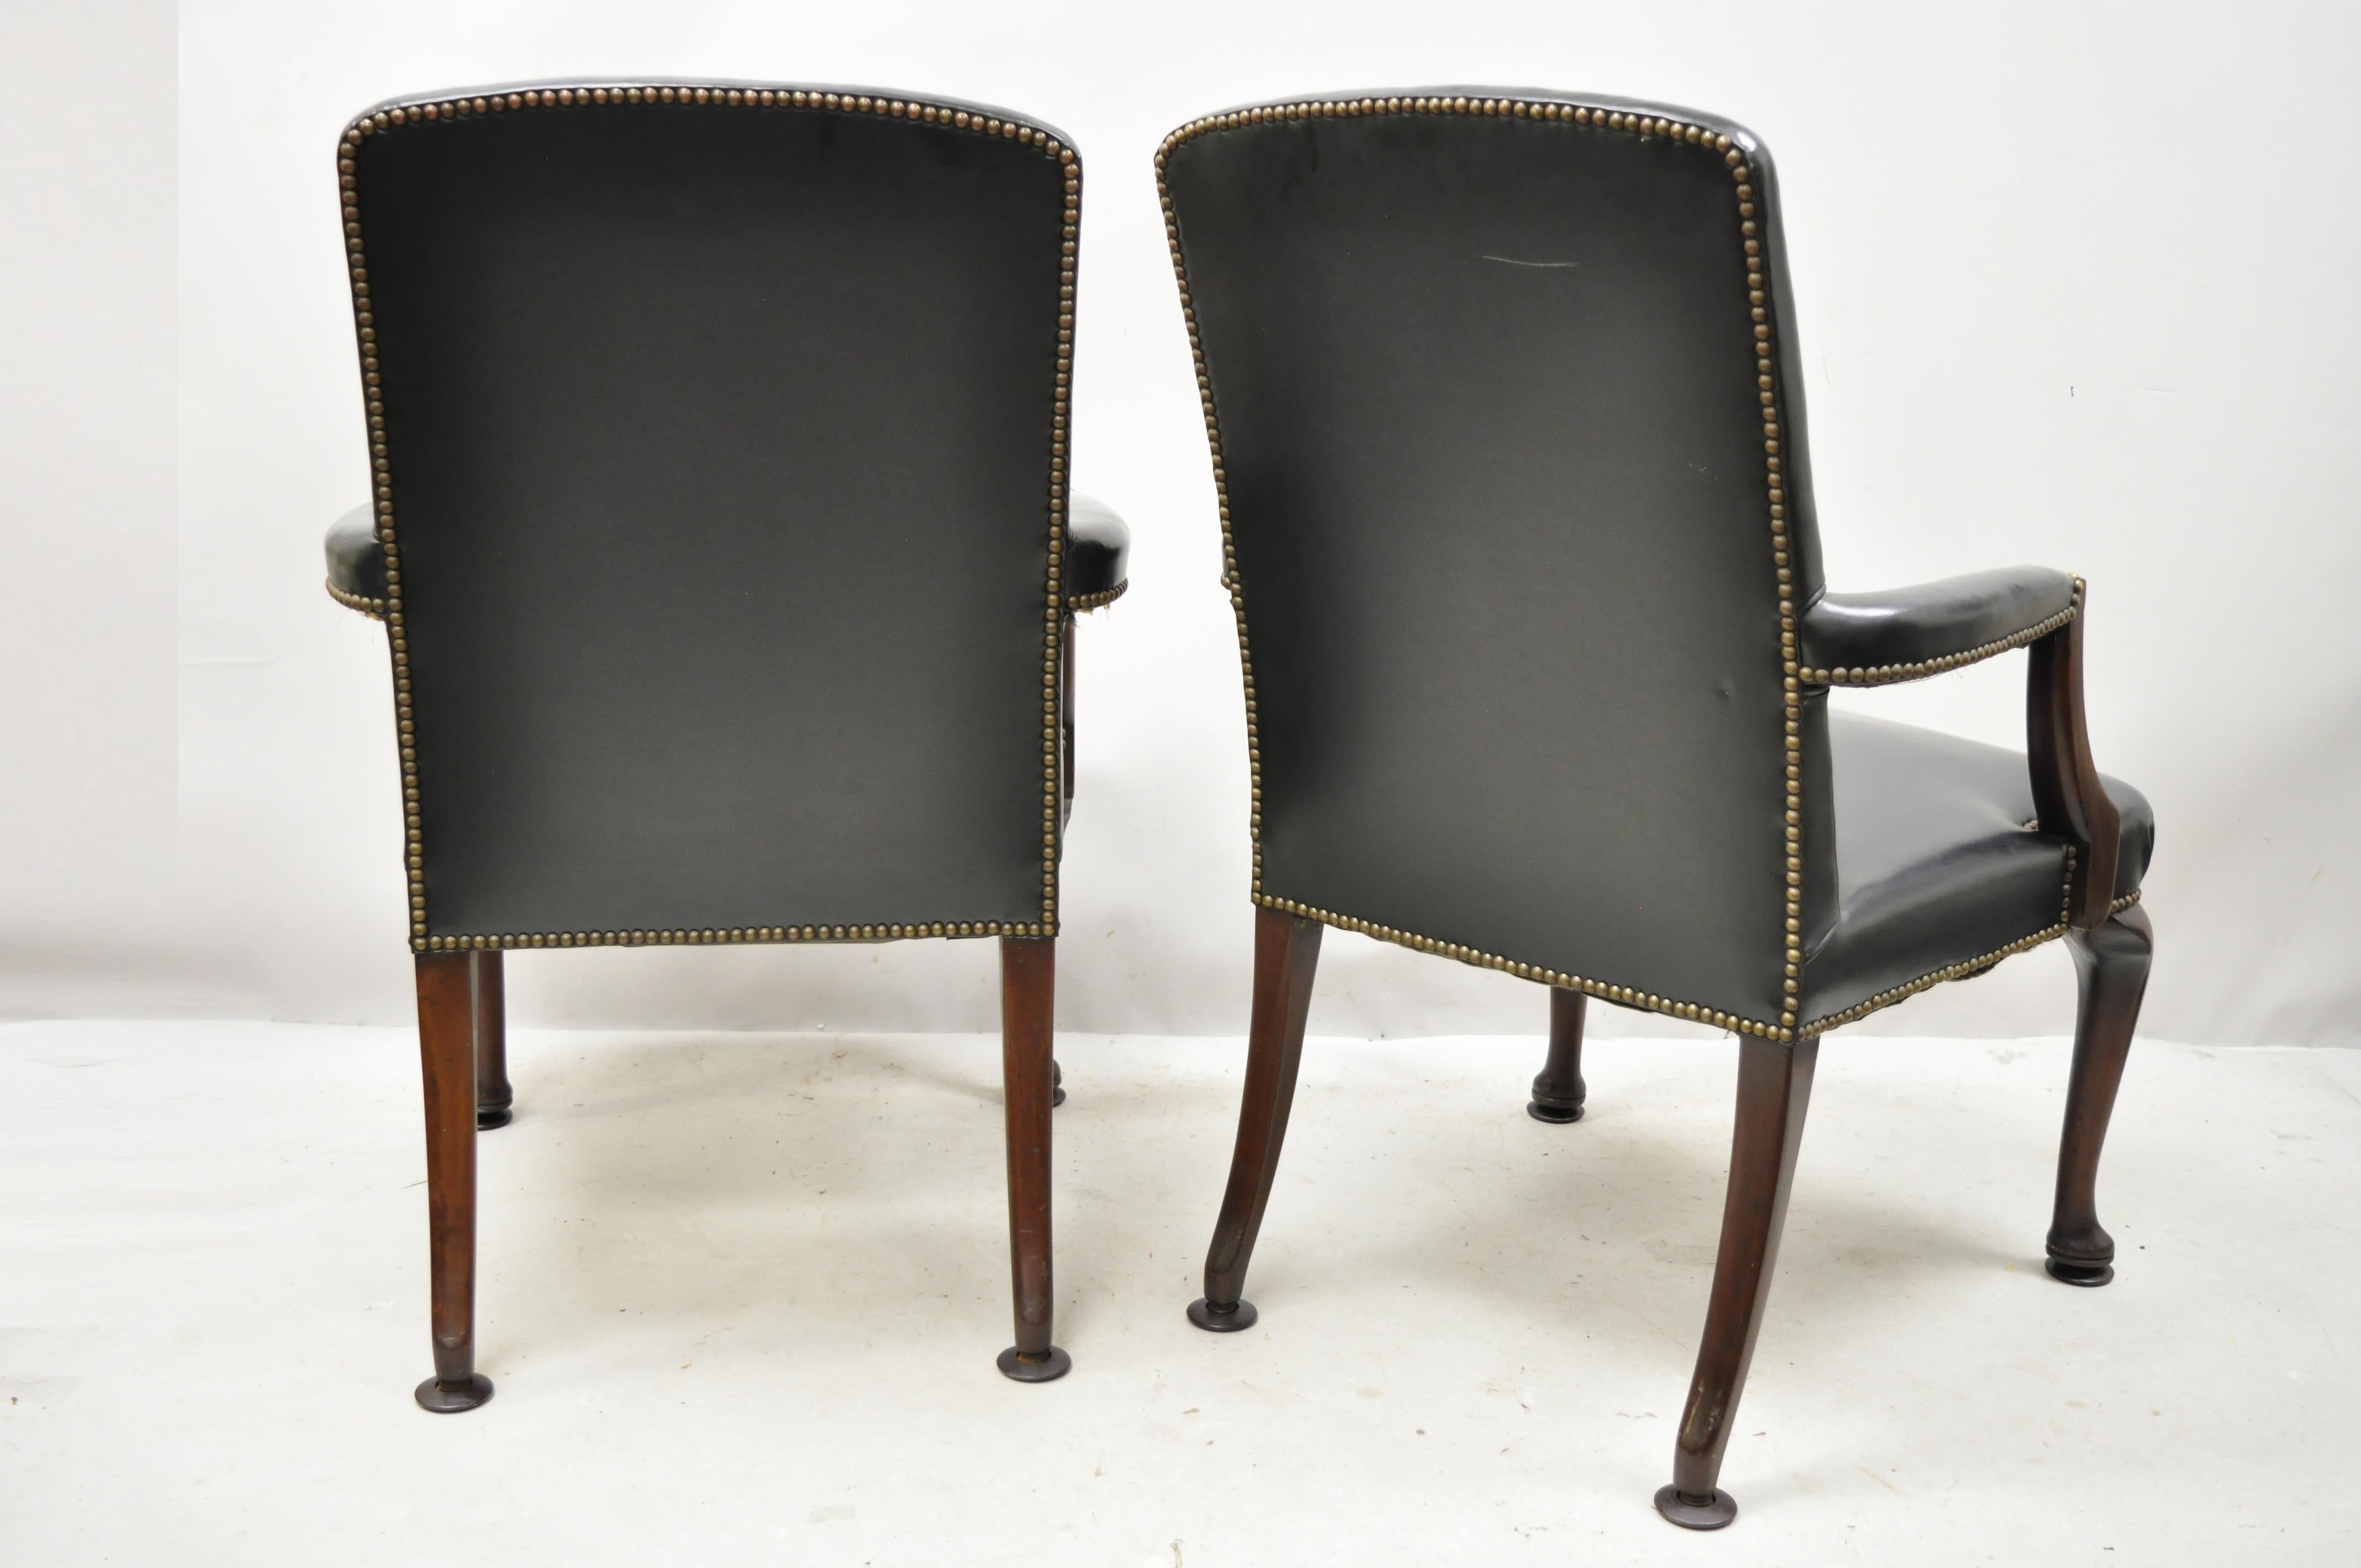 Antique English Georgian Style Dark Green Leather Library Office Chairs, a Pair For Sale 4